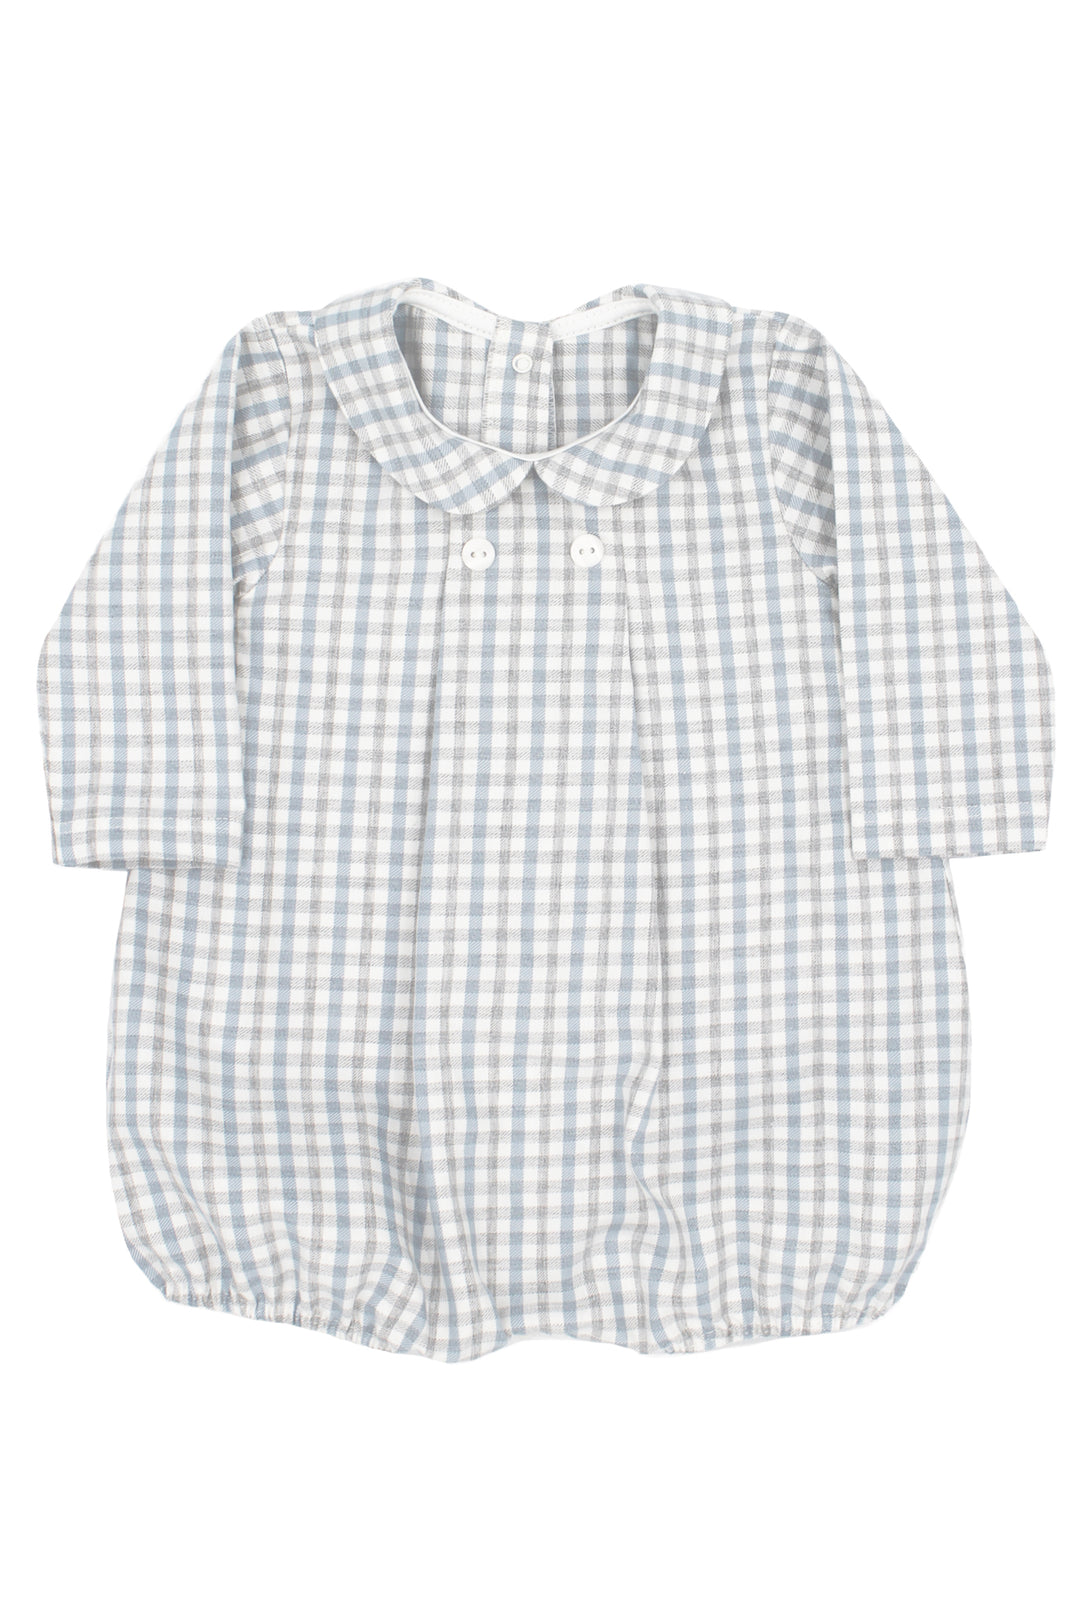 Rapife "Matias" Grey & Blue Checked Romper | Millie and John